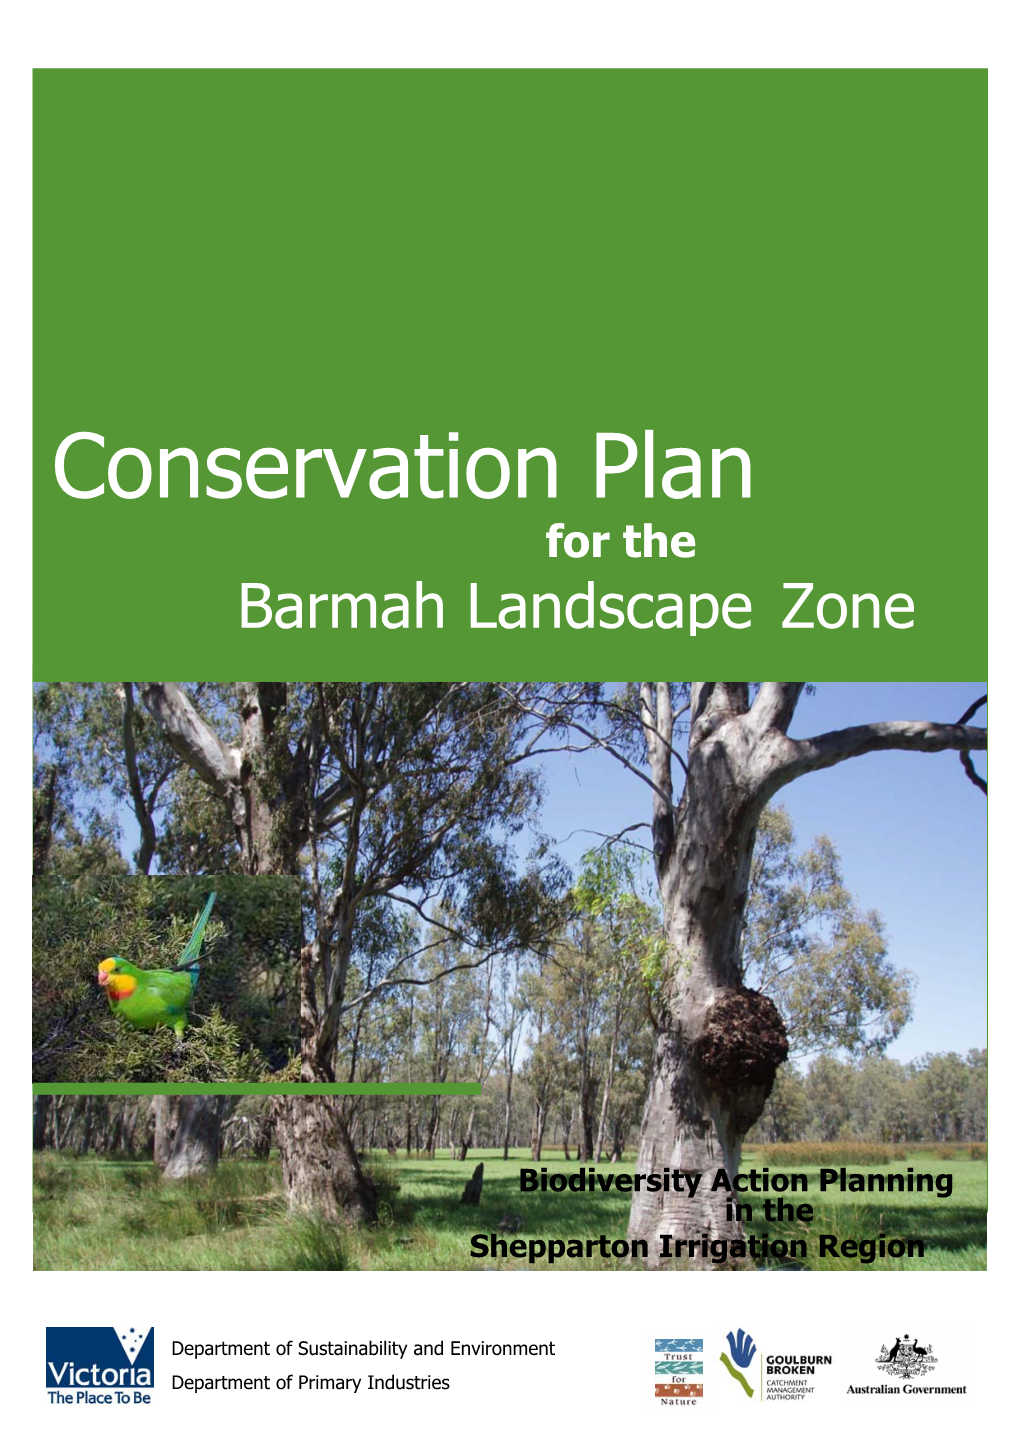 Conservation Plan for The